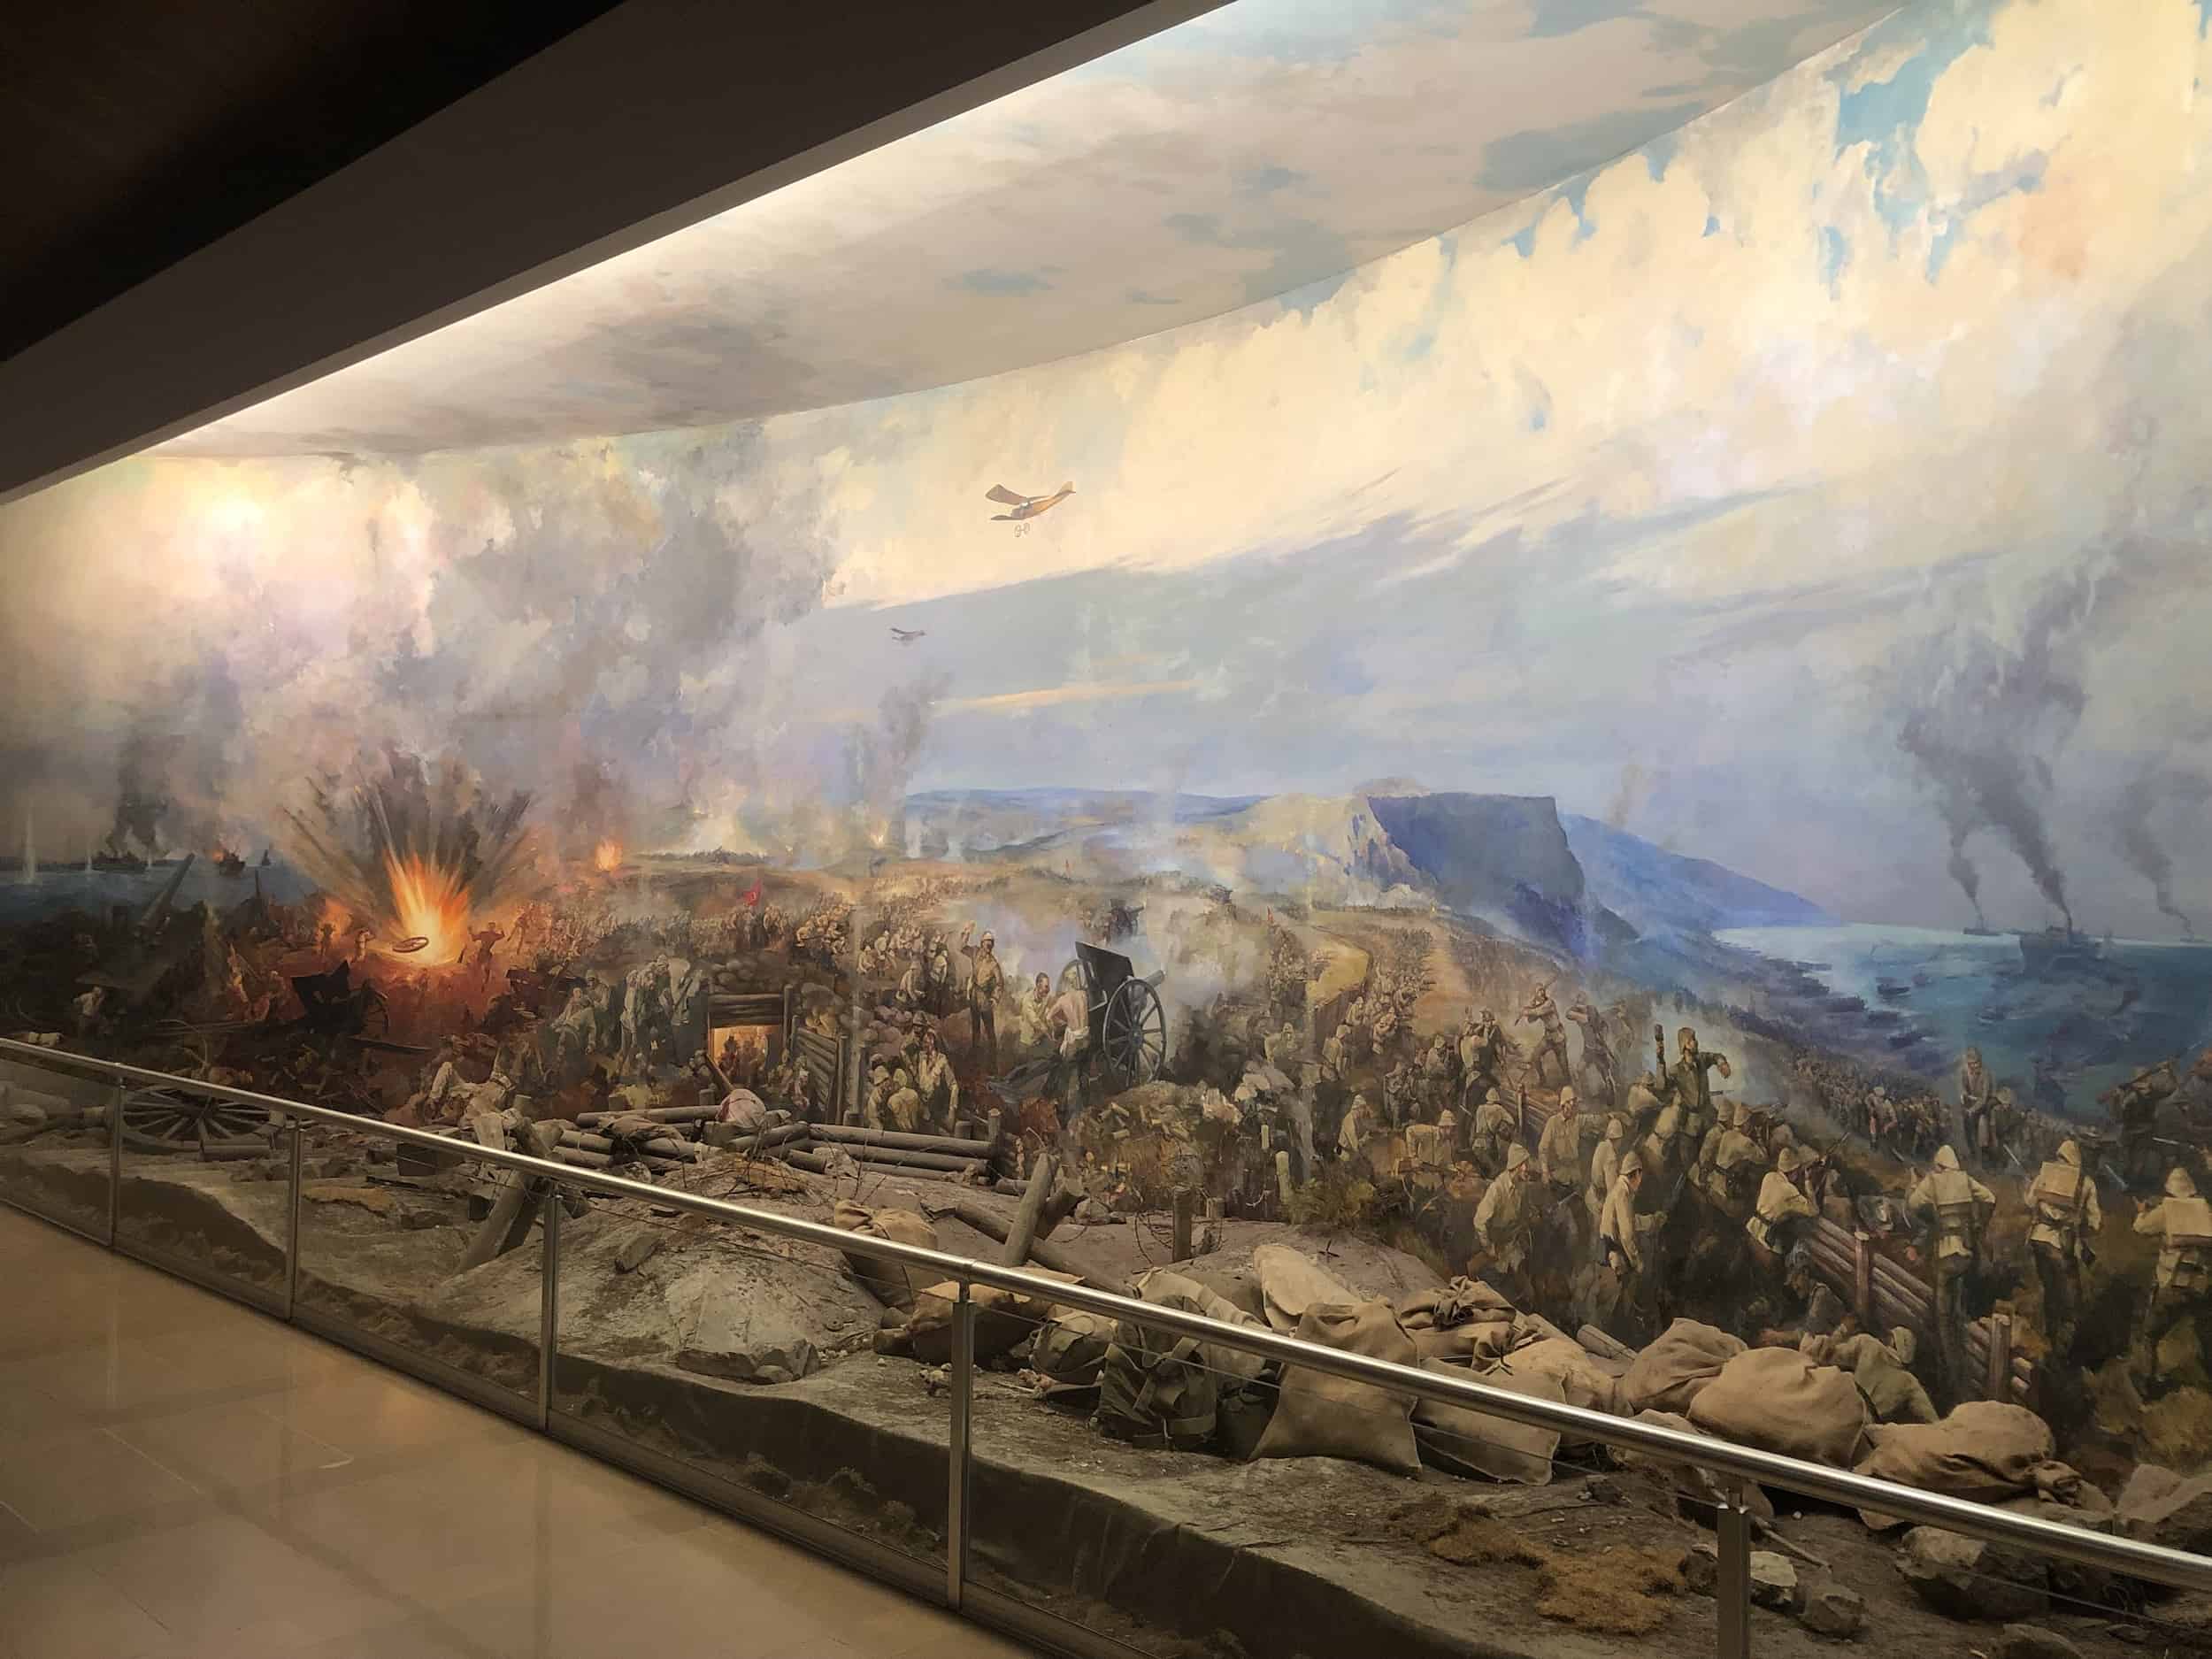 Diorama of the Gallipoli Campaign in the Battle of Dardanelles Hall at the Harbiye Military Museum in Istanbul, Turkey